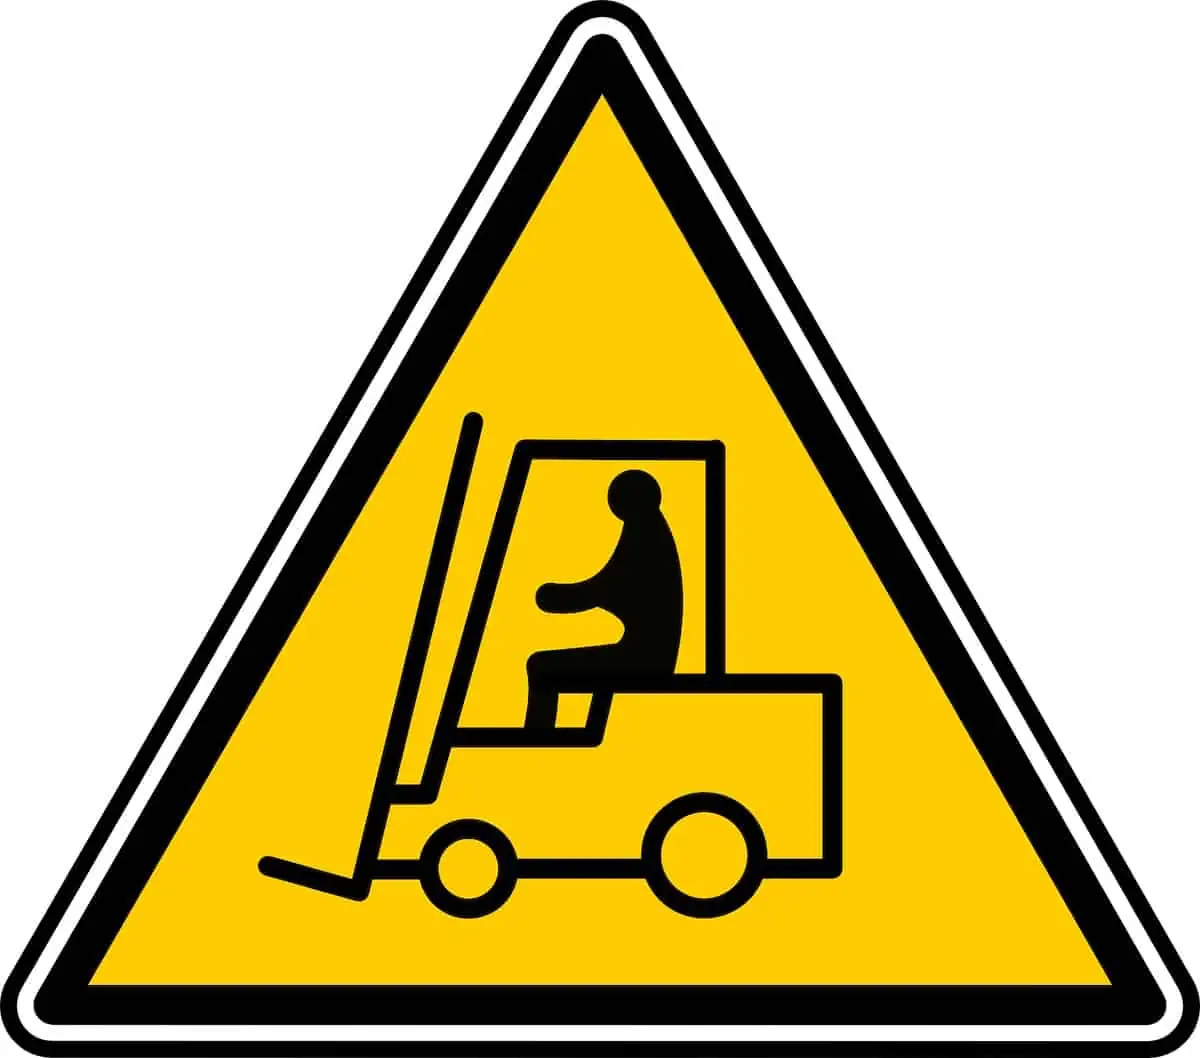 Worst Forklift Accident Ever and Forklift Safety! (Video)